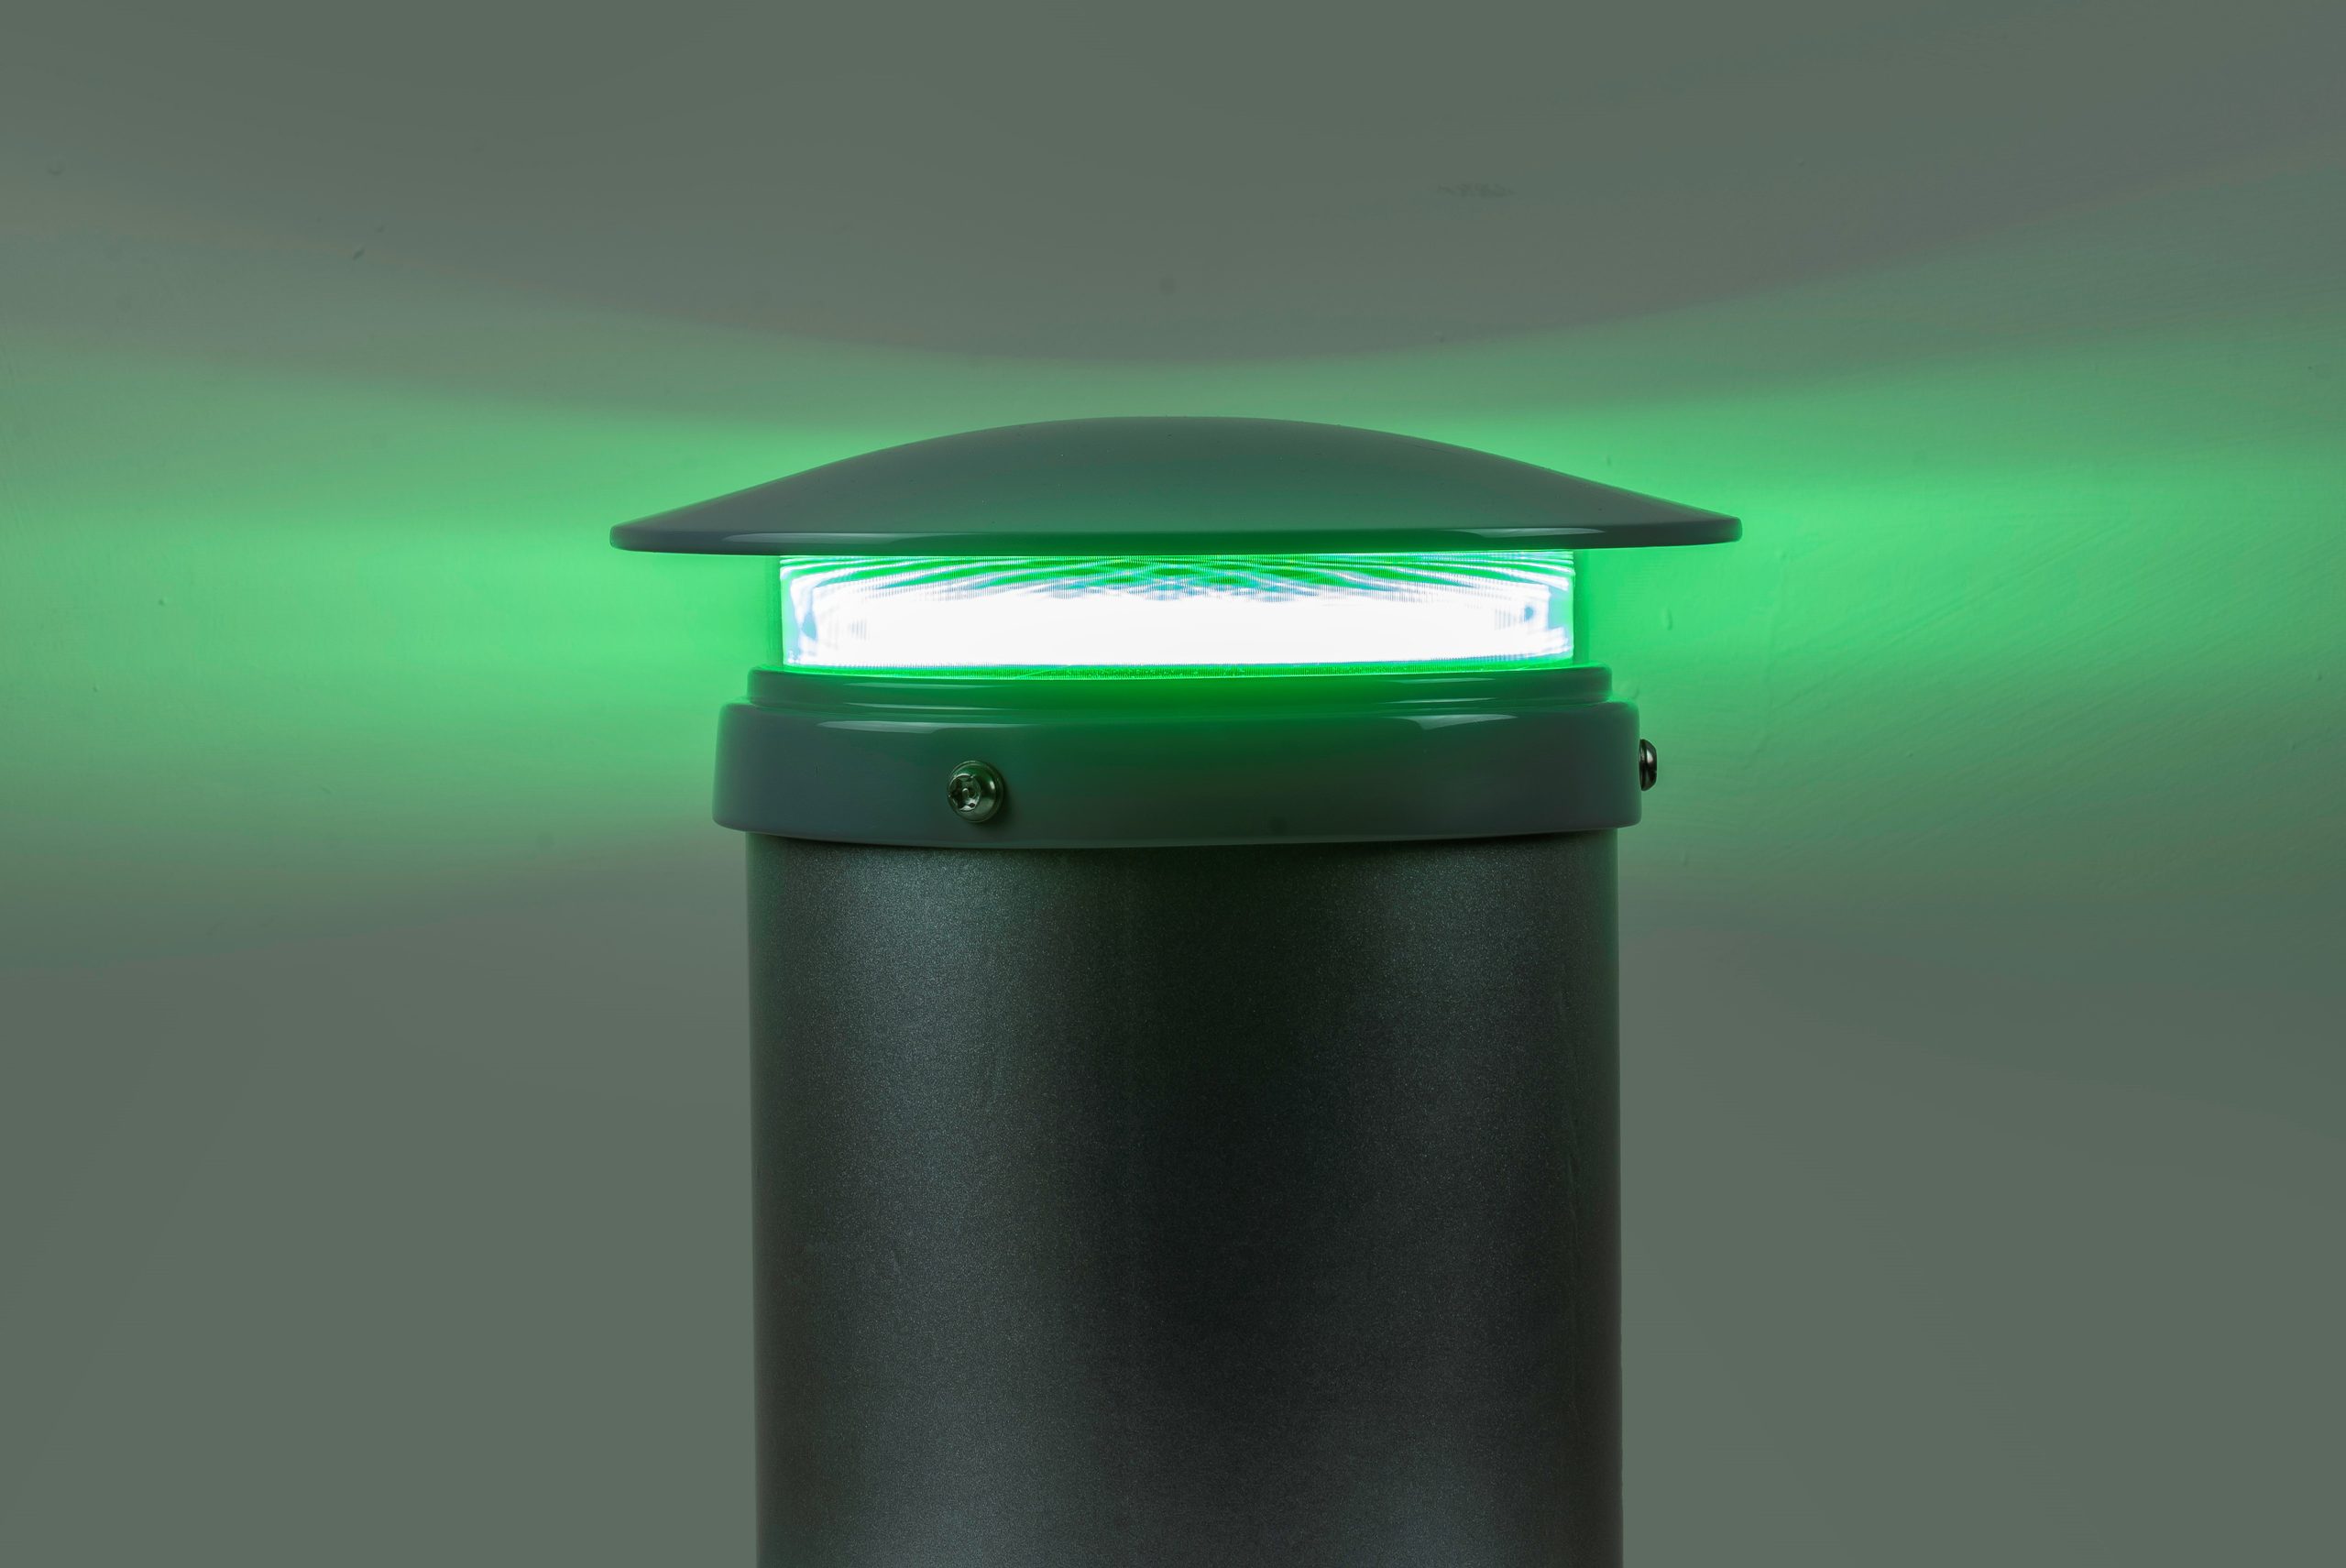 A close-up photograph of a glowing green light. The light emits a vibrant green hue, suggesting a signal or indicator. The image conveys the concept of a green light or signal in a specific context.